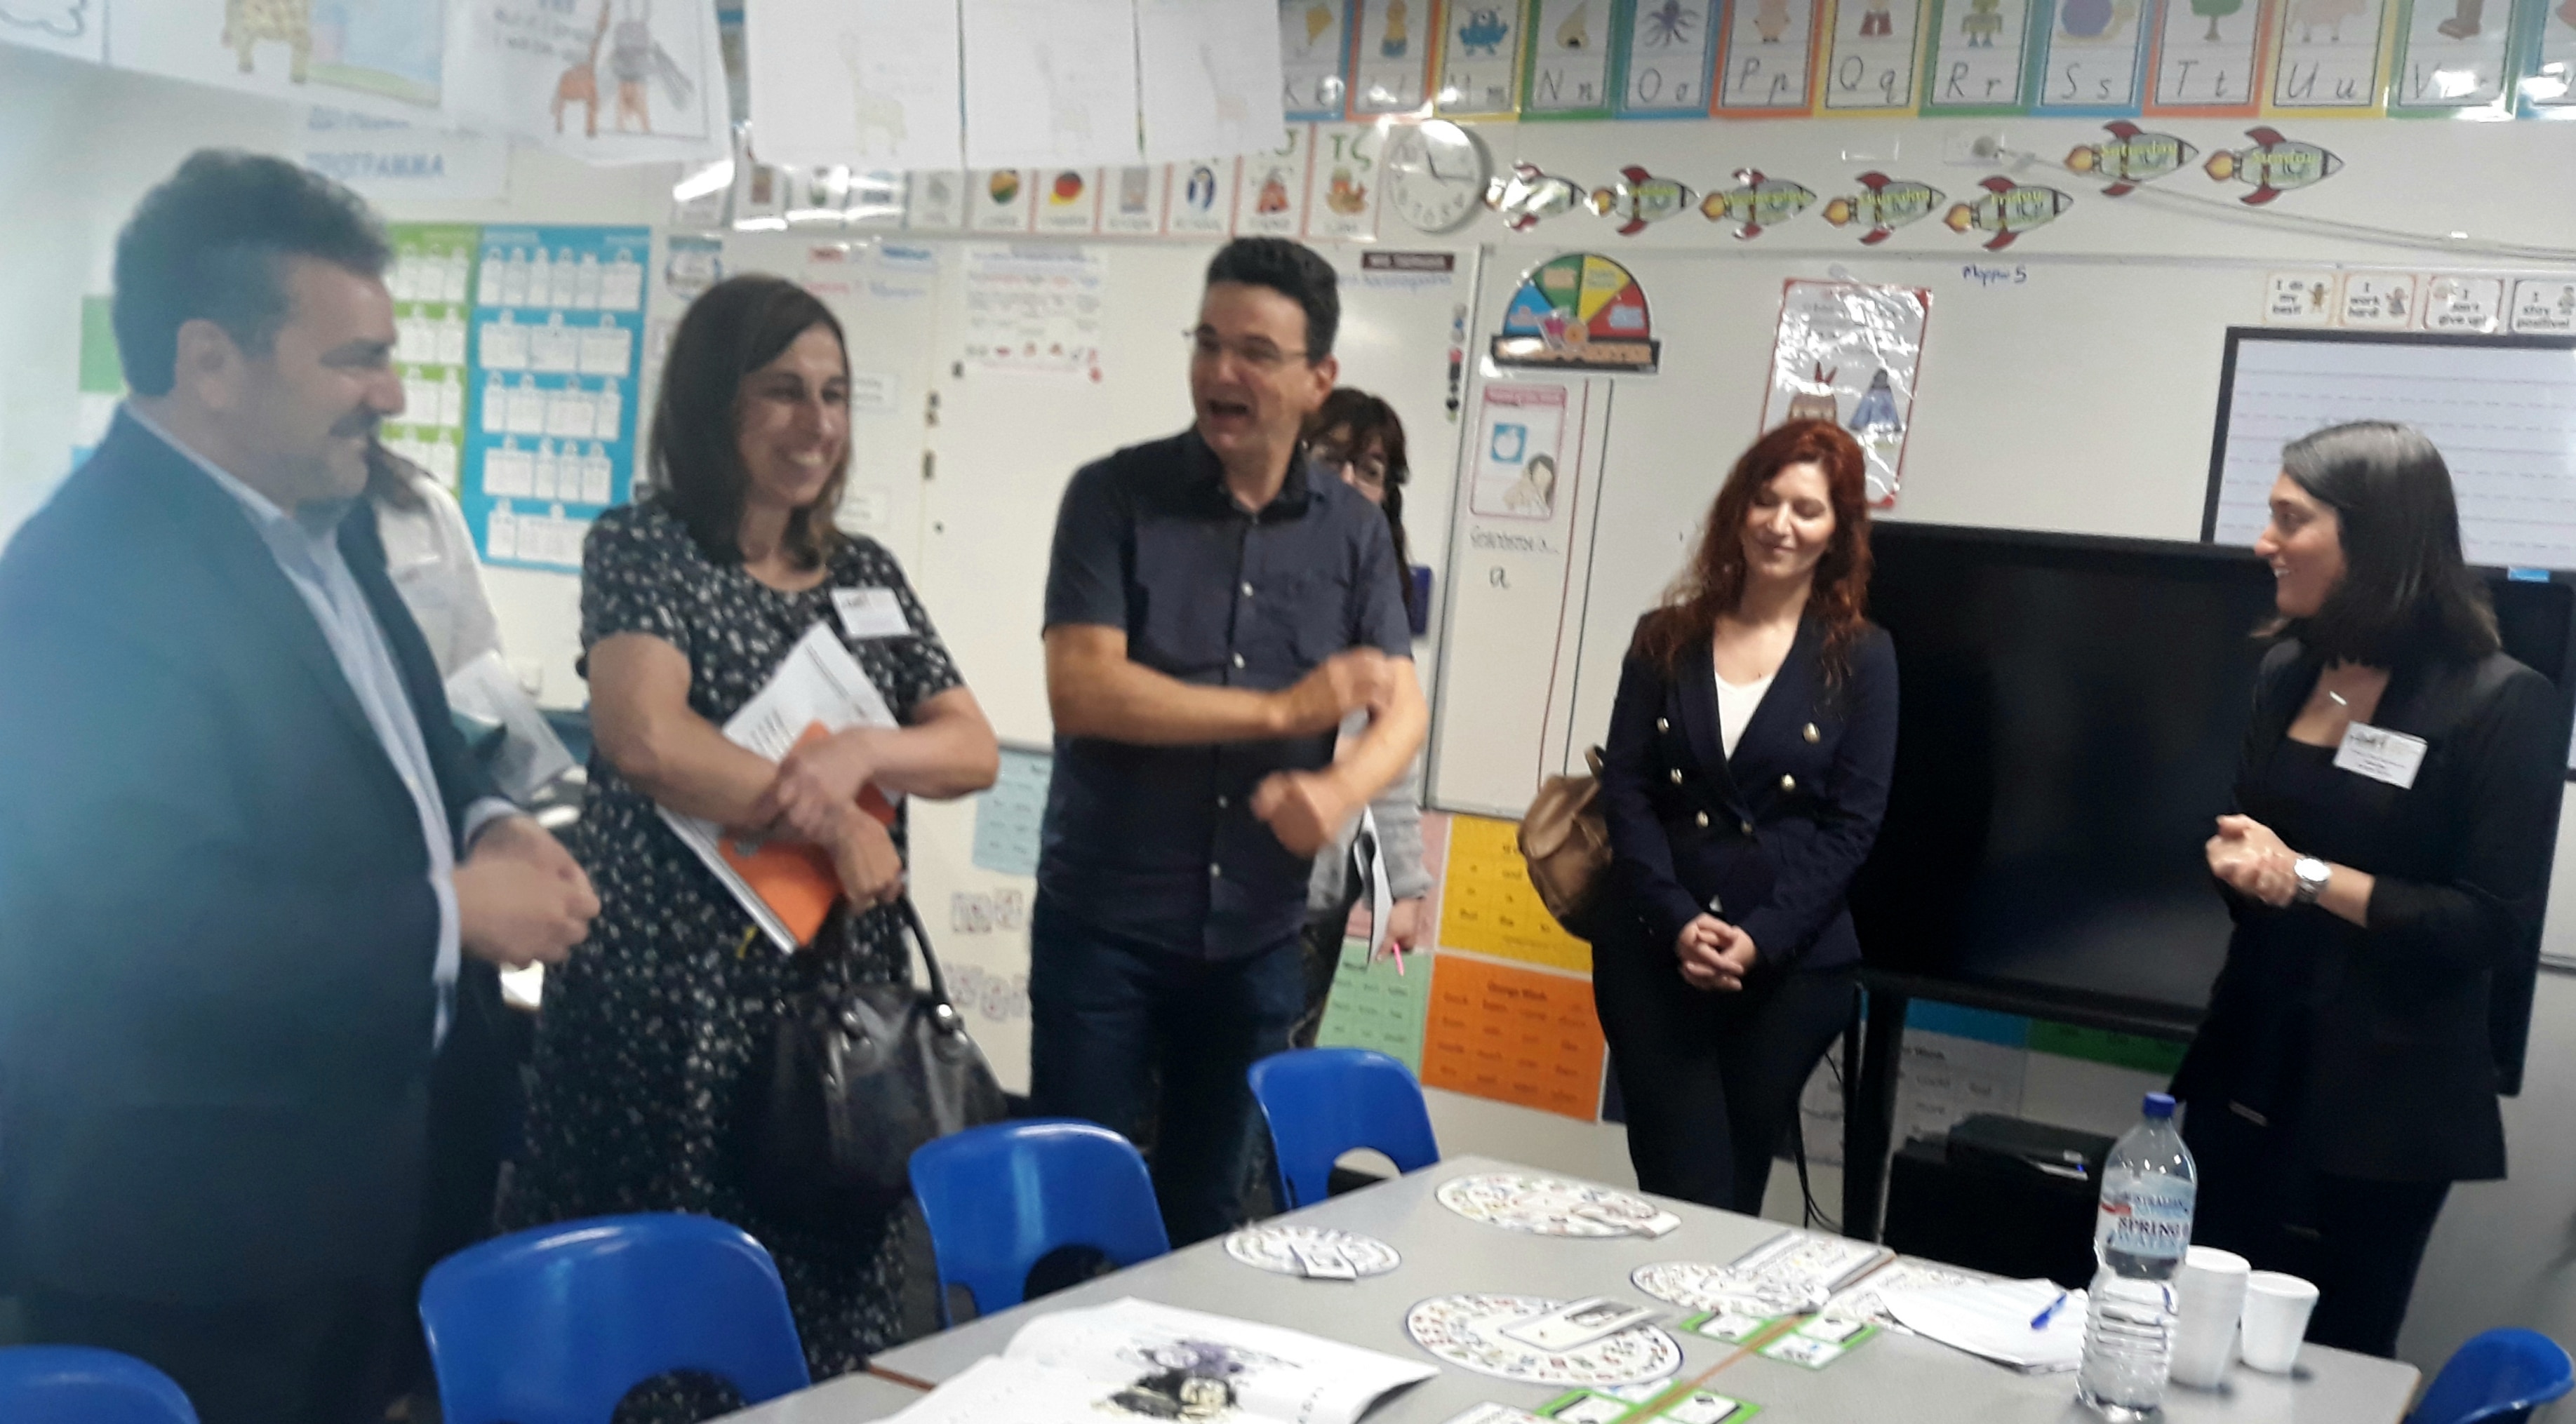 The MGTAV Research Launch took place on the 23rd of February 2020 at Lalor North Primary School.